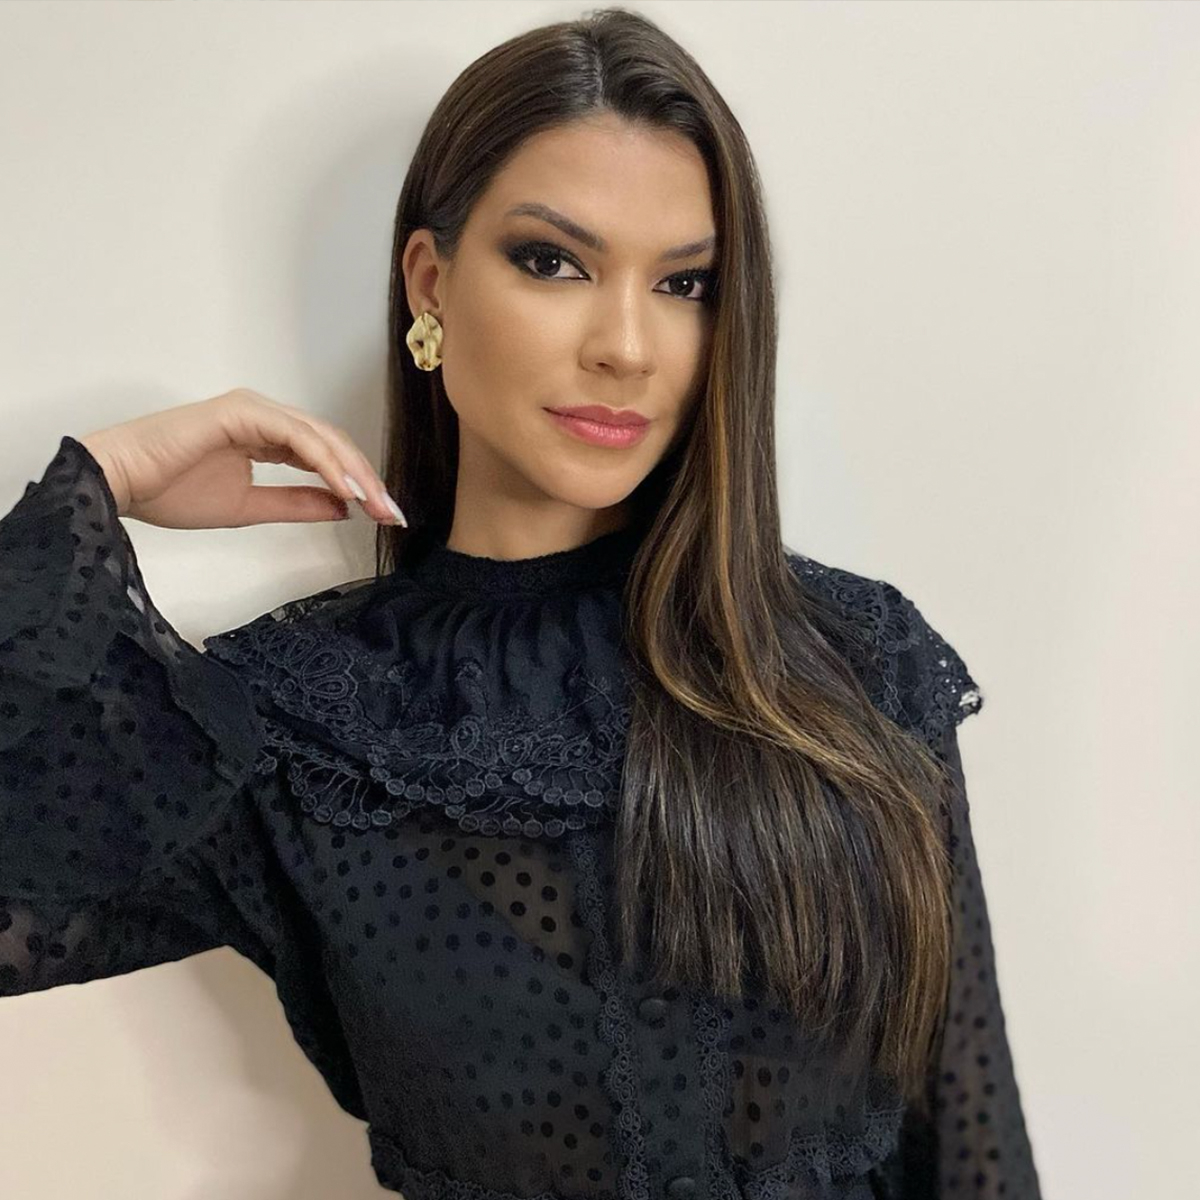 Miss United Continents Brazil 2018 Gleycy Correia Dead at 27